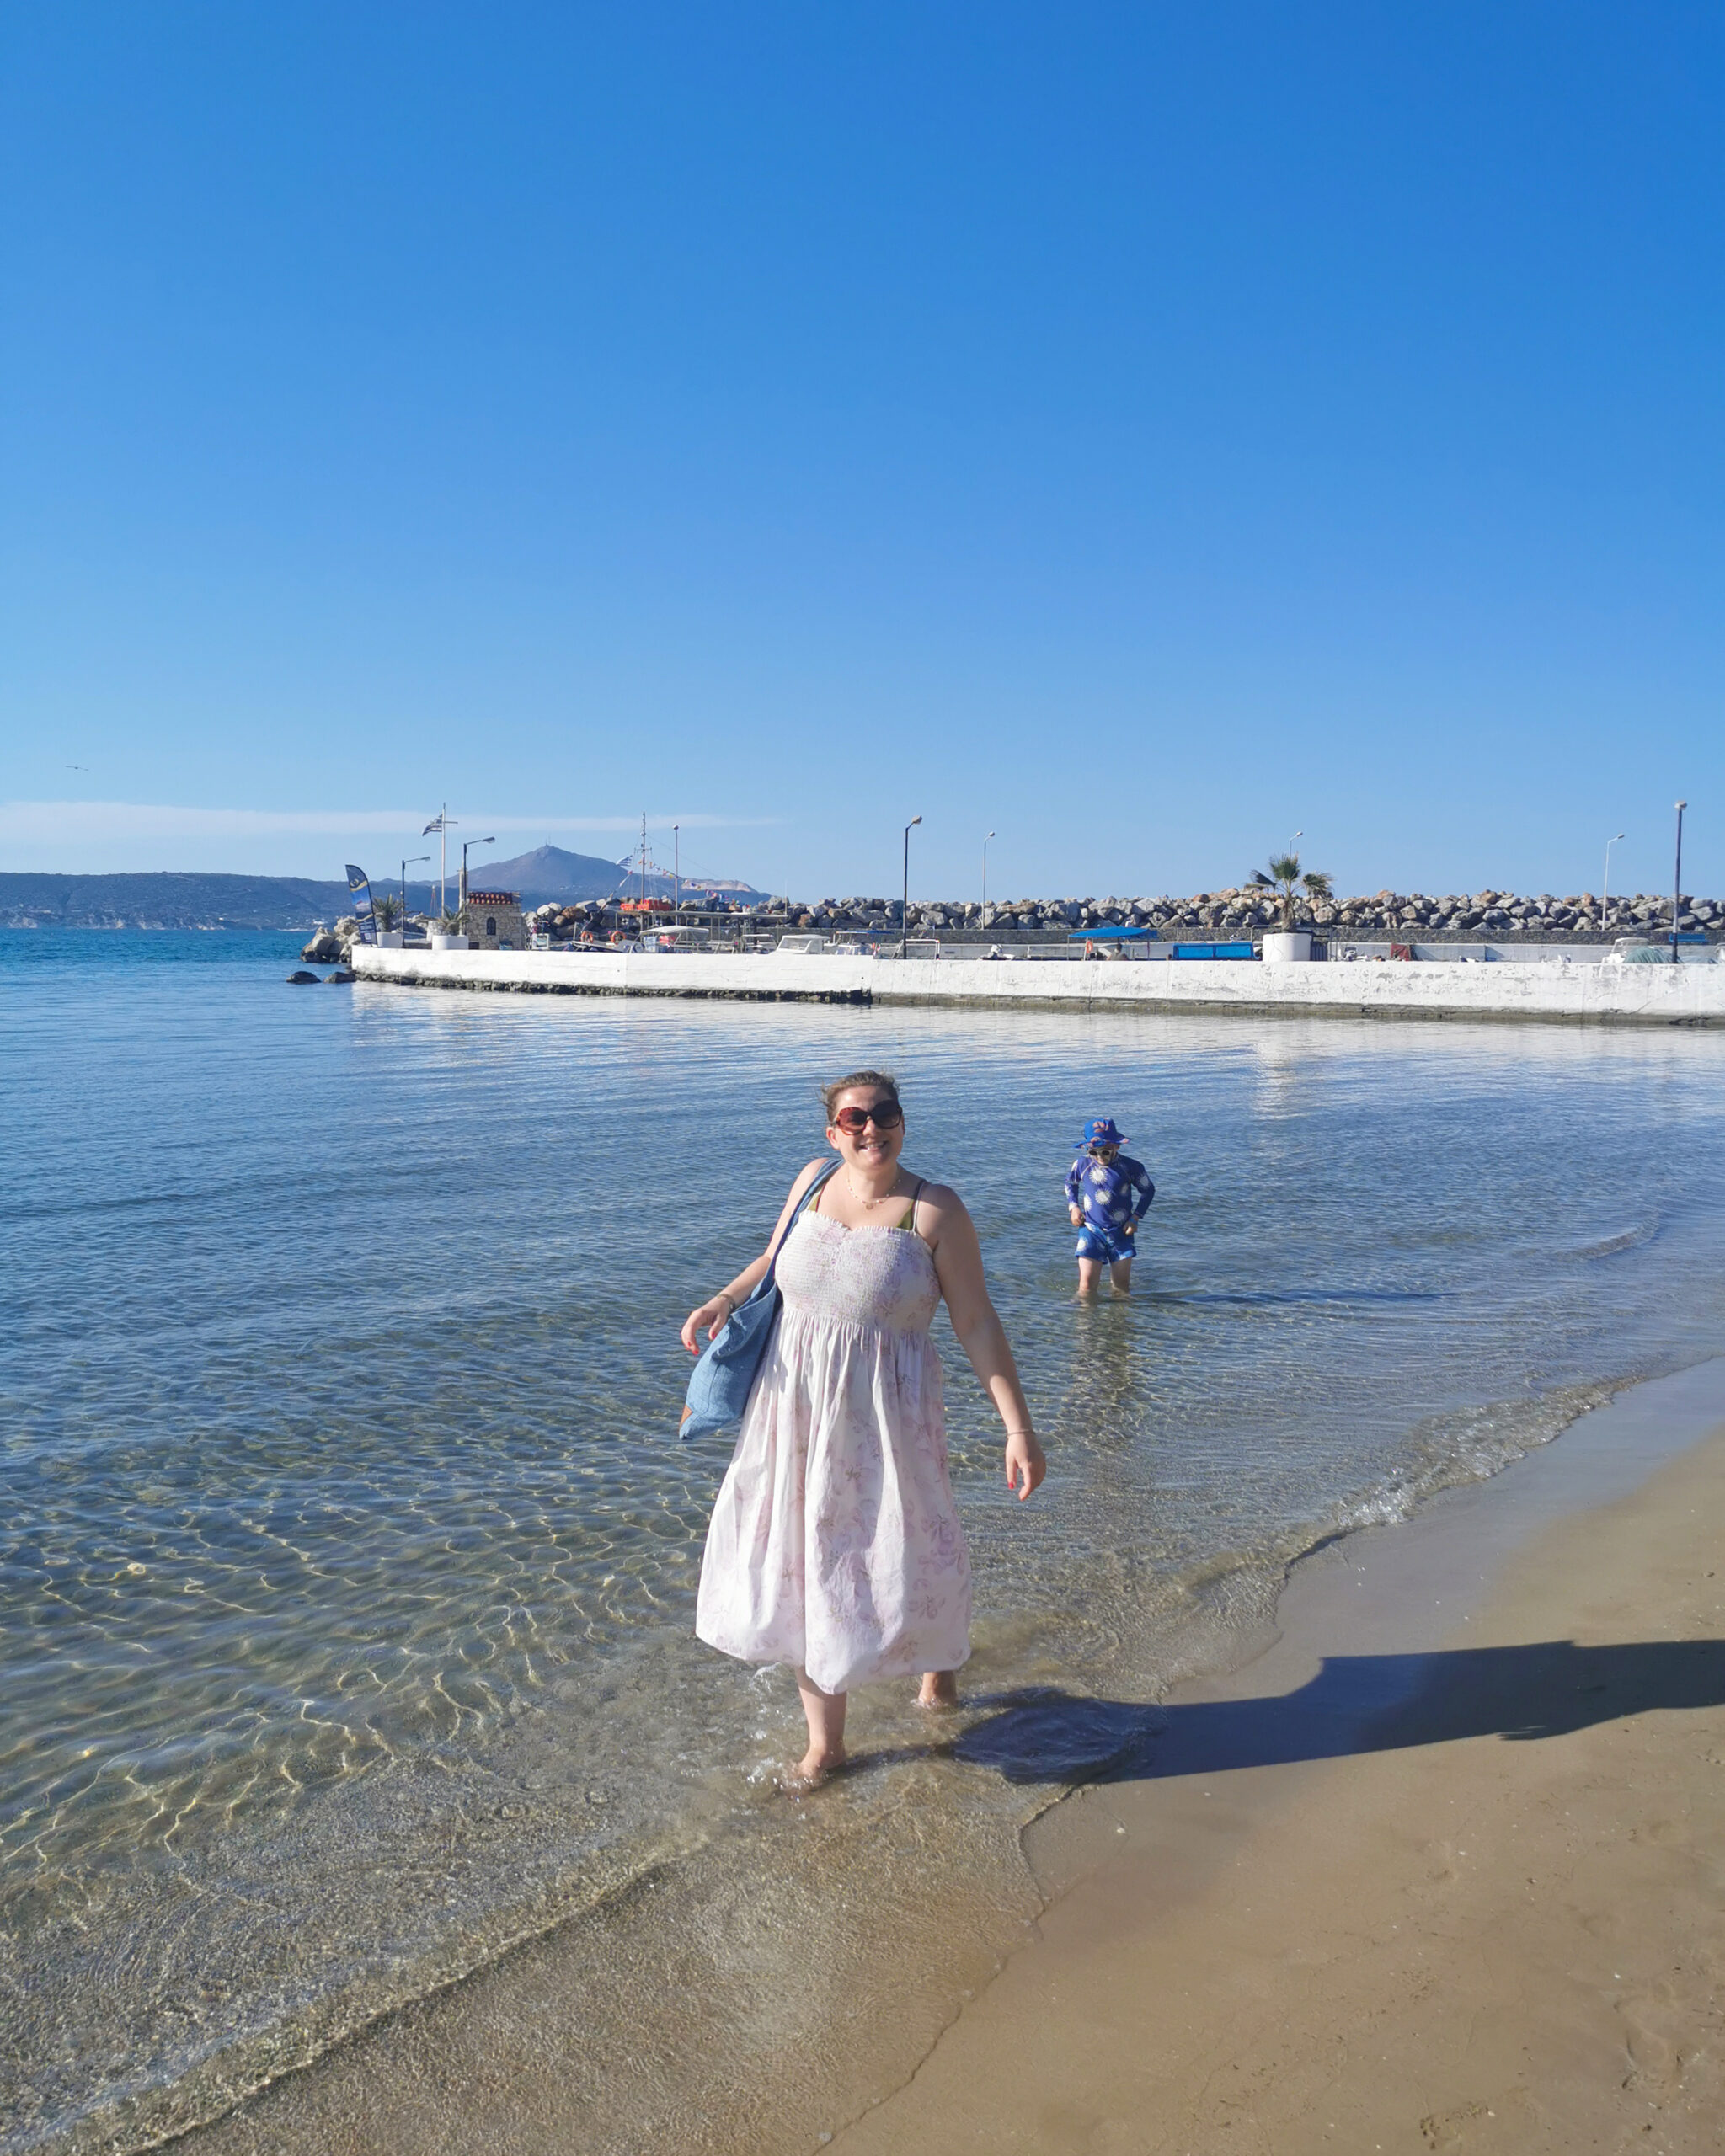 Things To Do Around Chania With Kids, Visit Crete, Chania, Crete, Visit Crete with Children, Family-Friendly, Visit Chania, Family-Friendly Destination, the Frenchie Mummy